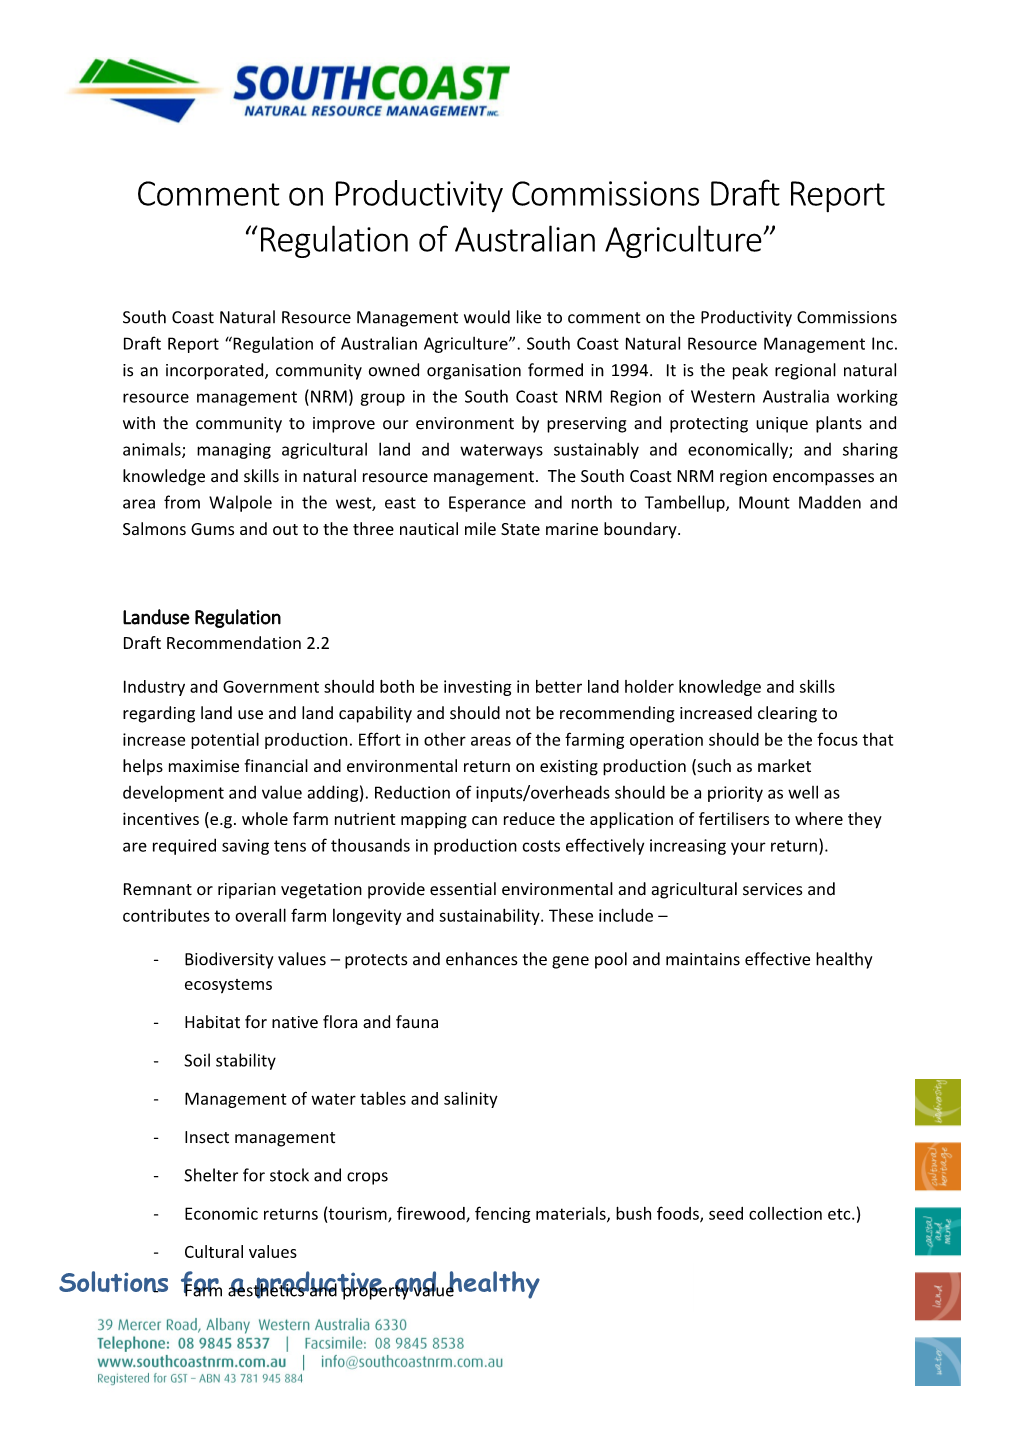 Submission DR229 - South Coast Natural Resource Management Inc - Regulation of Agriculture